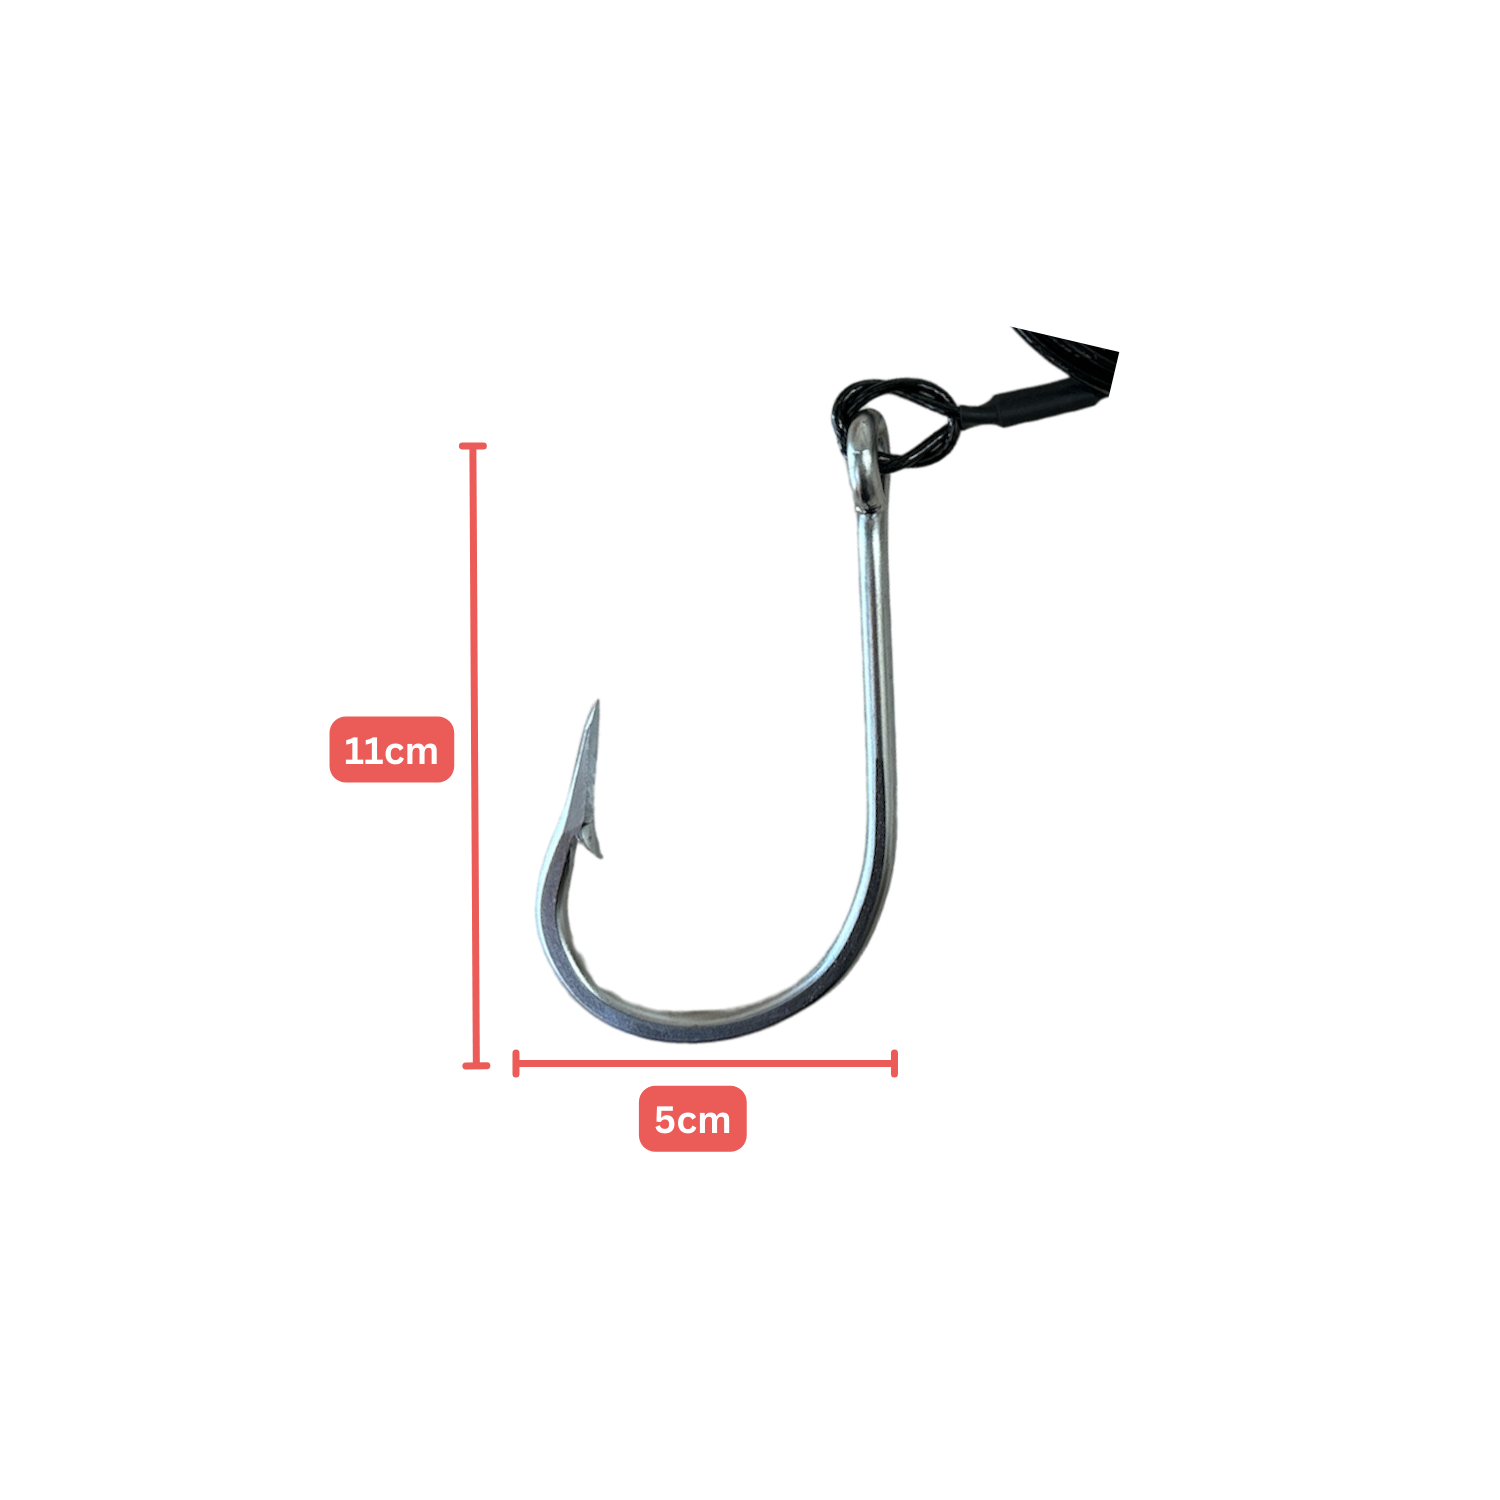 2X shark trace 10/0 circle hook 200kg [445lb] s/s coated 49 strand wire